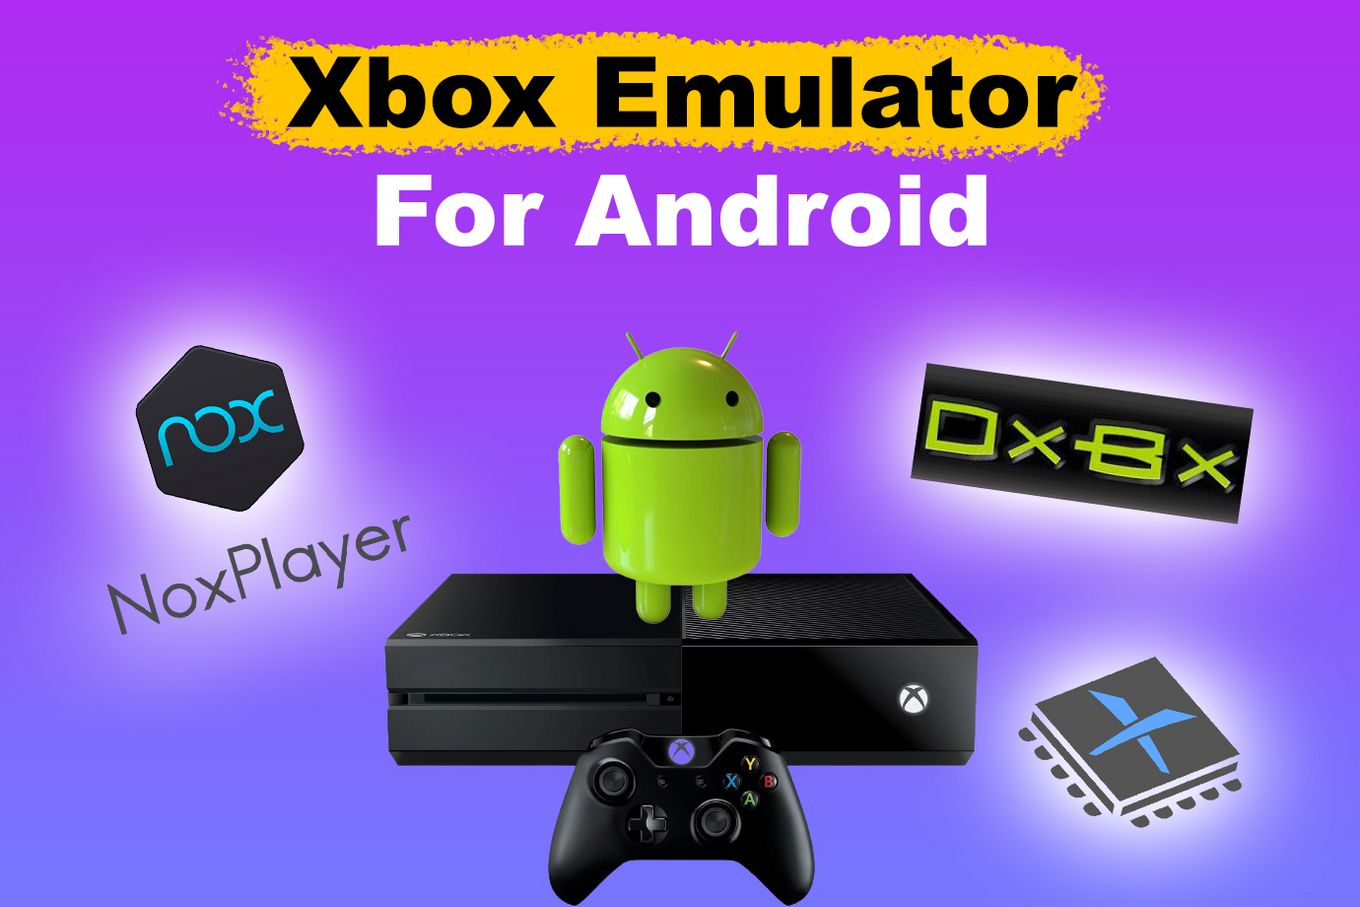 What is an Xbox One Emulator for Android?